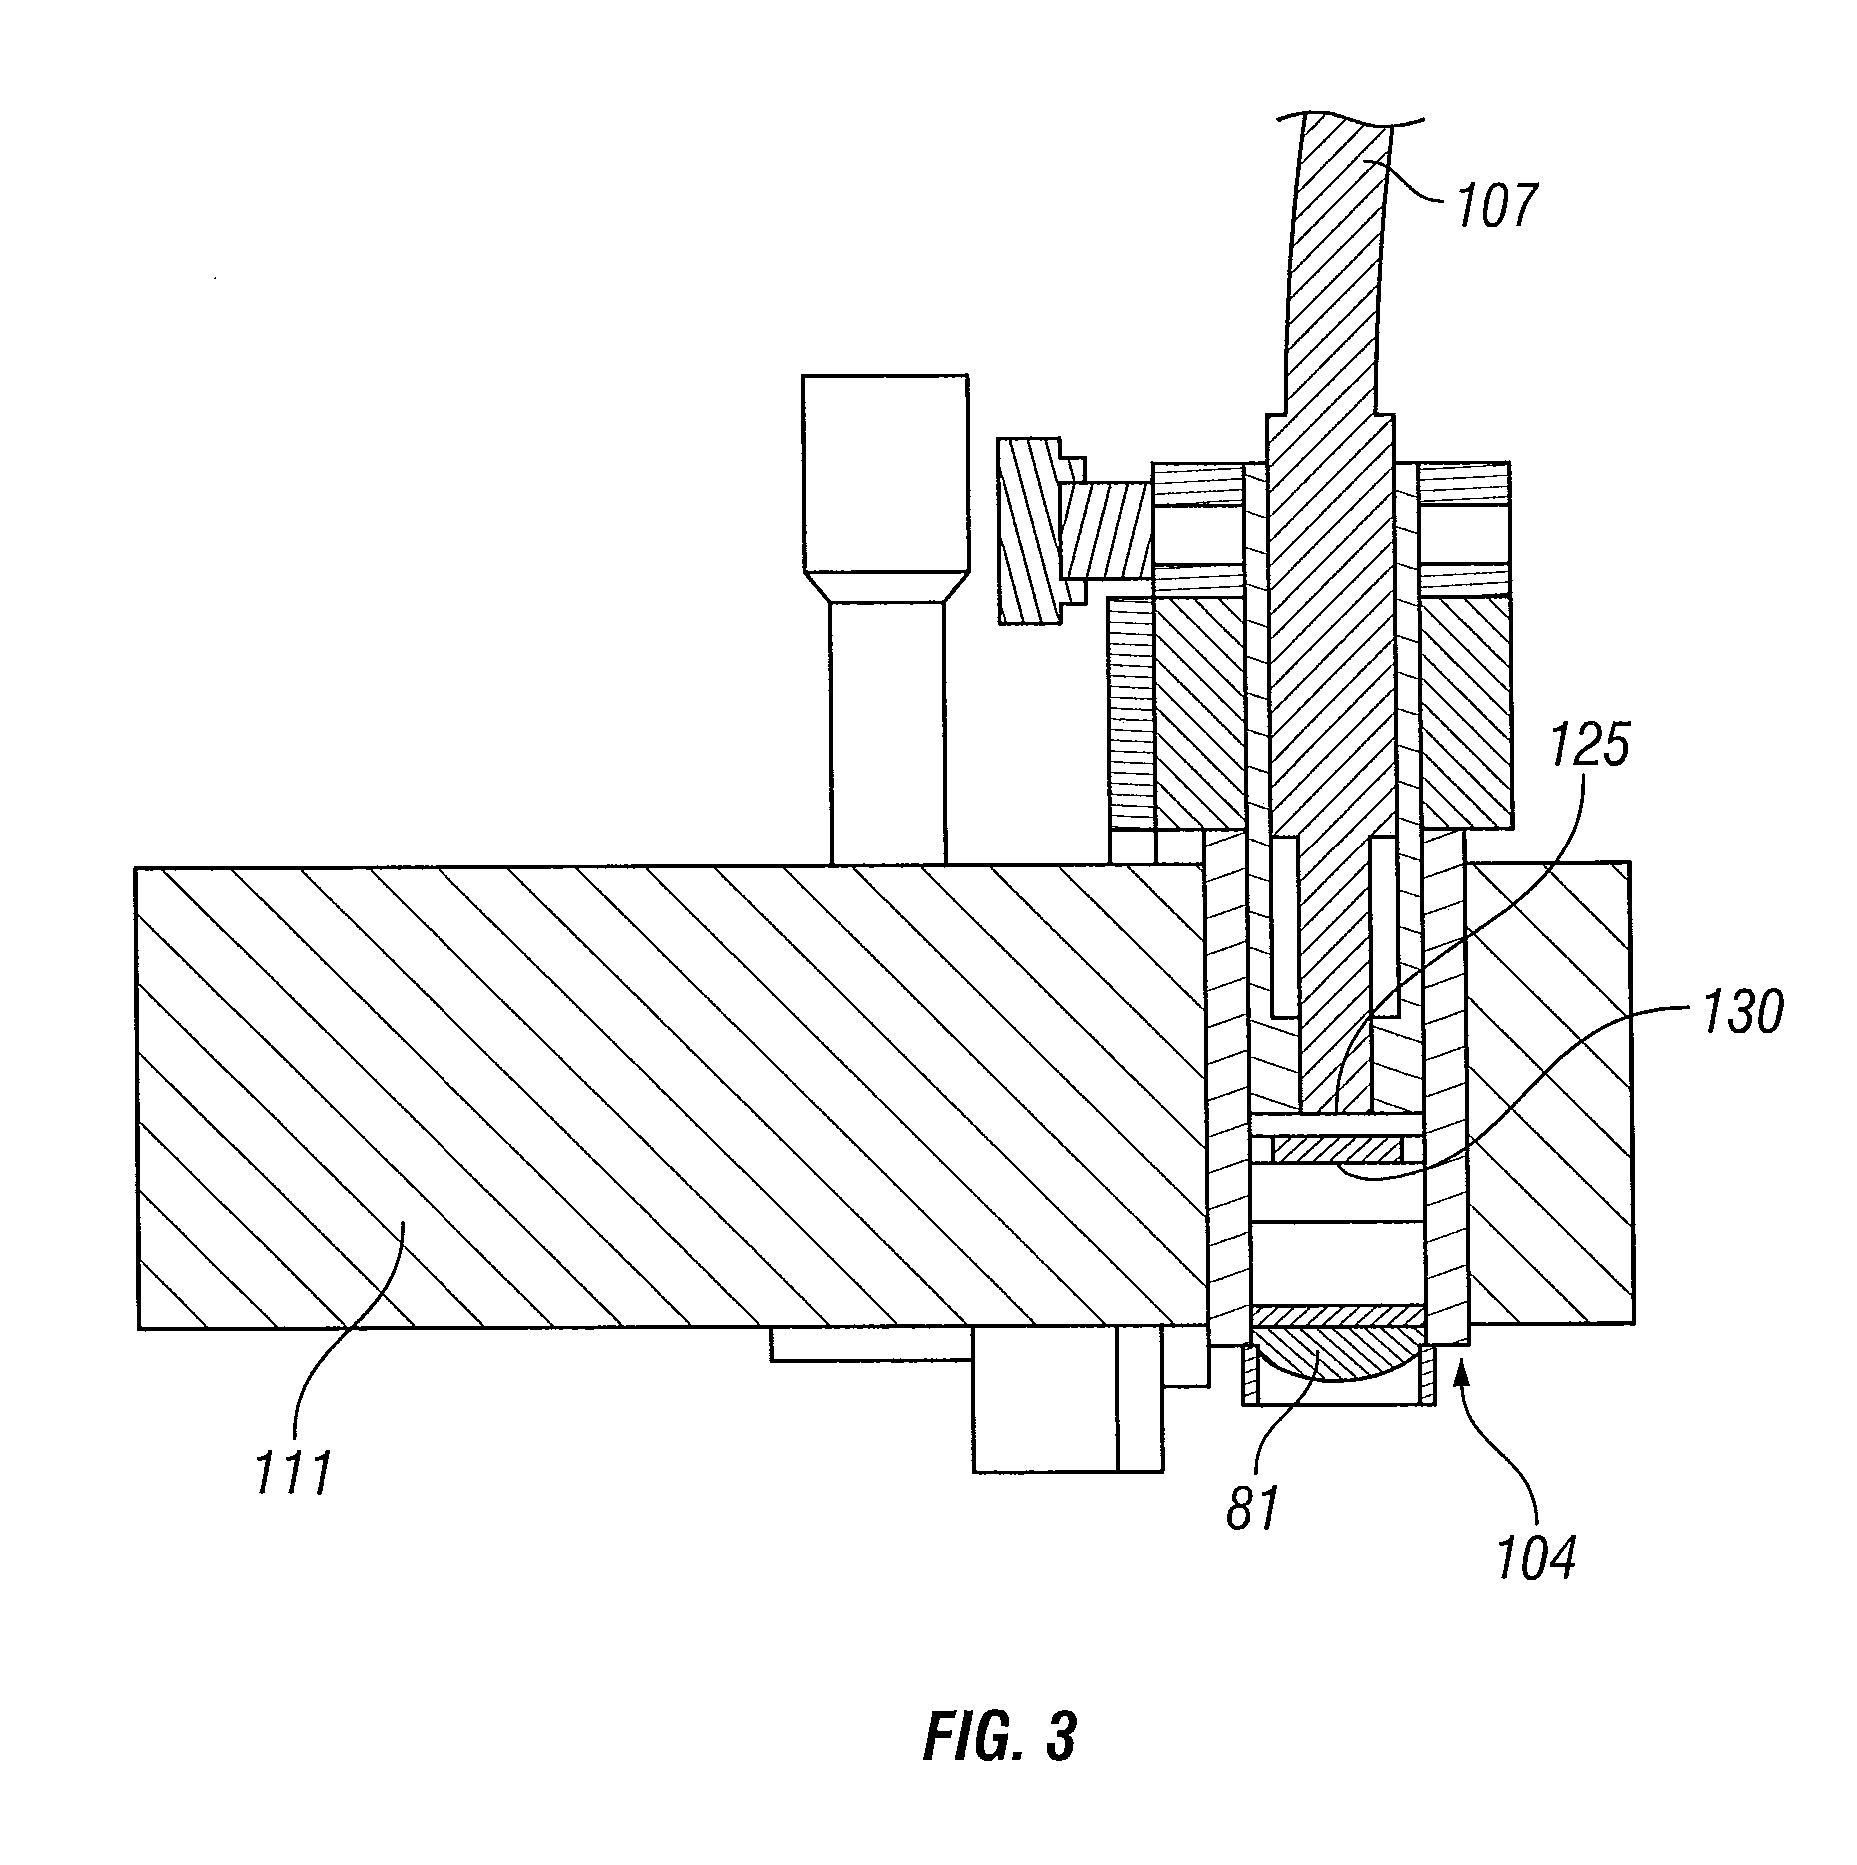 Corneal treatment system and method